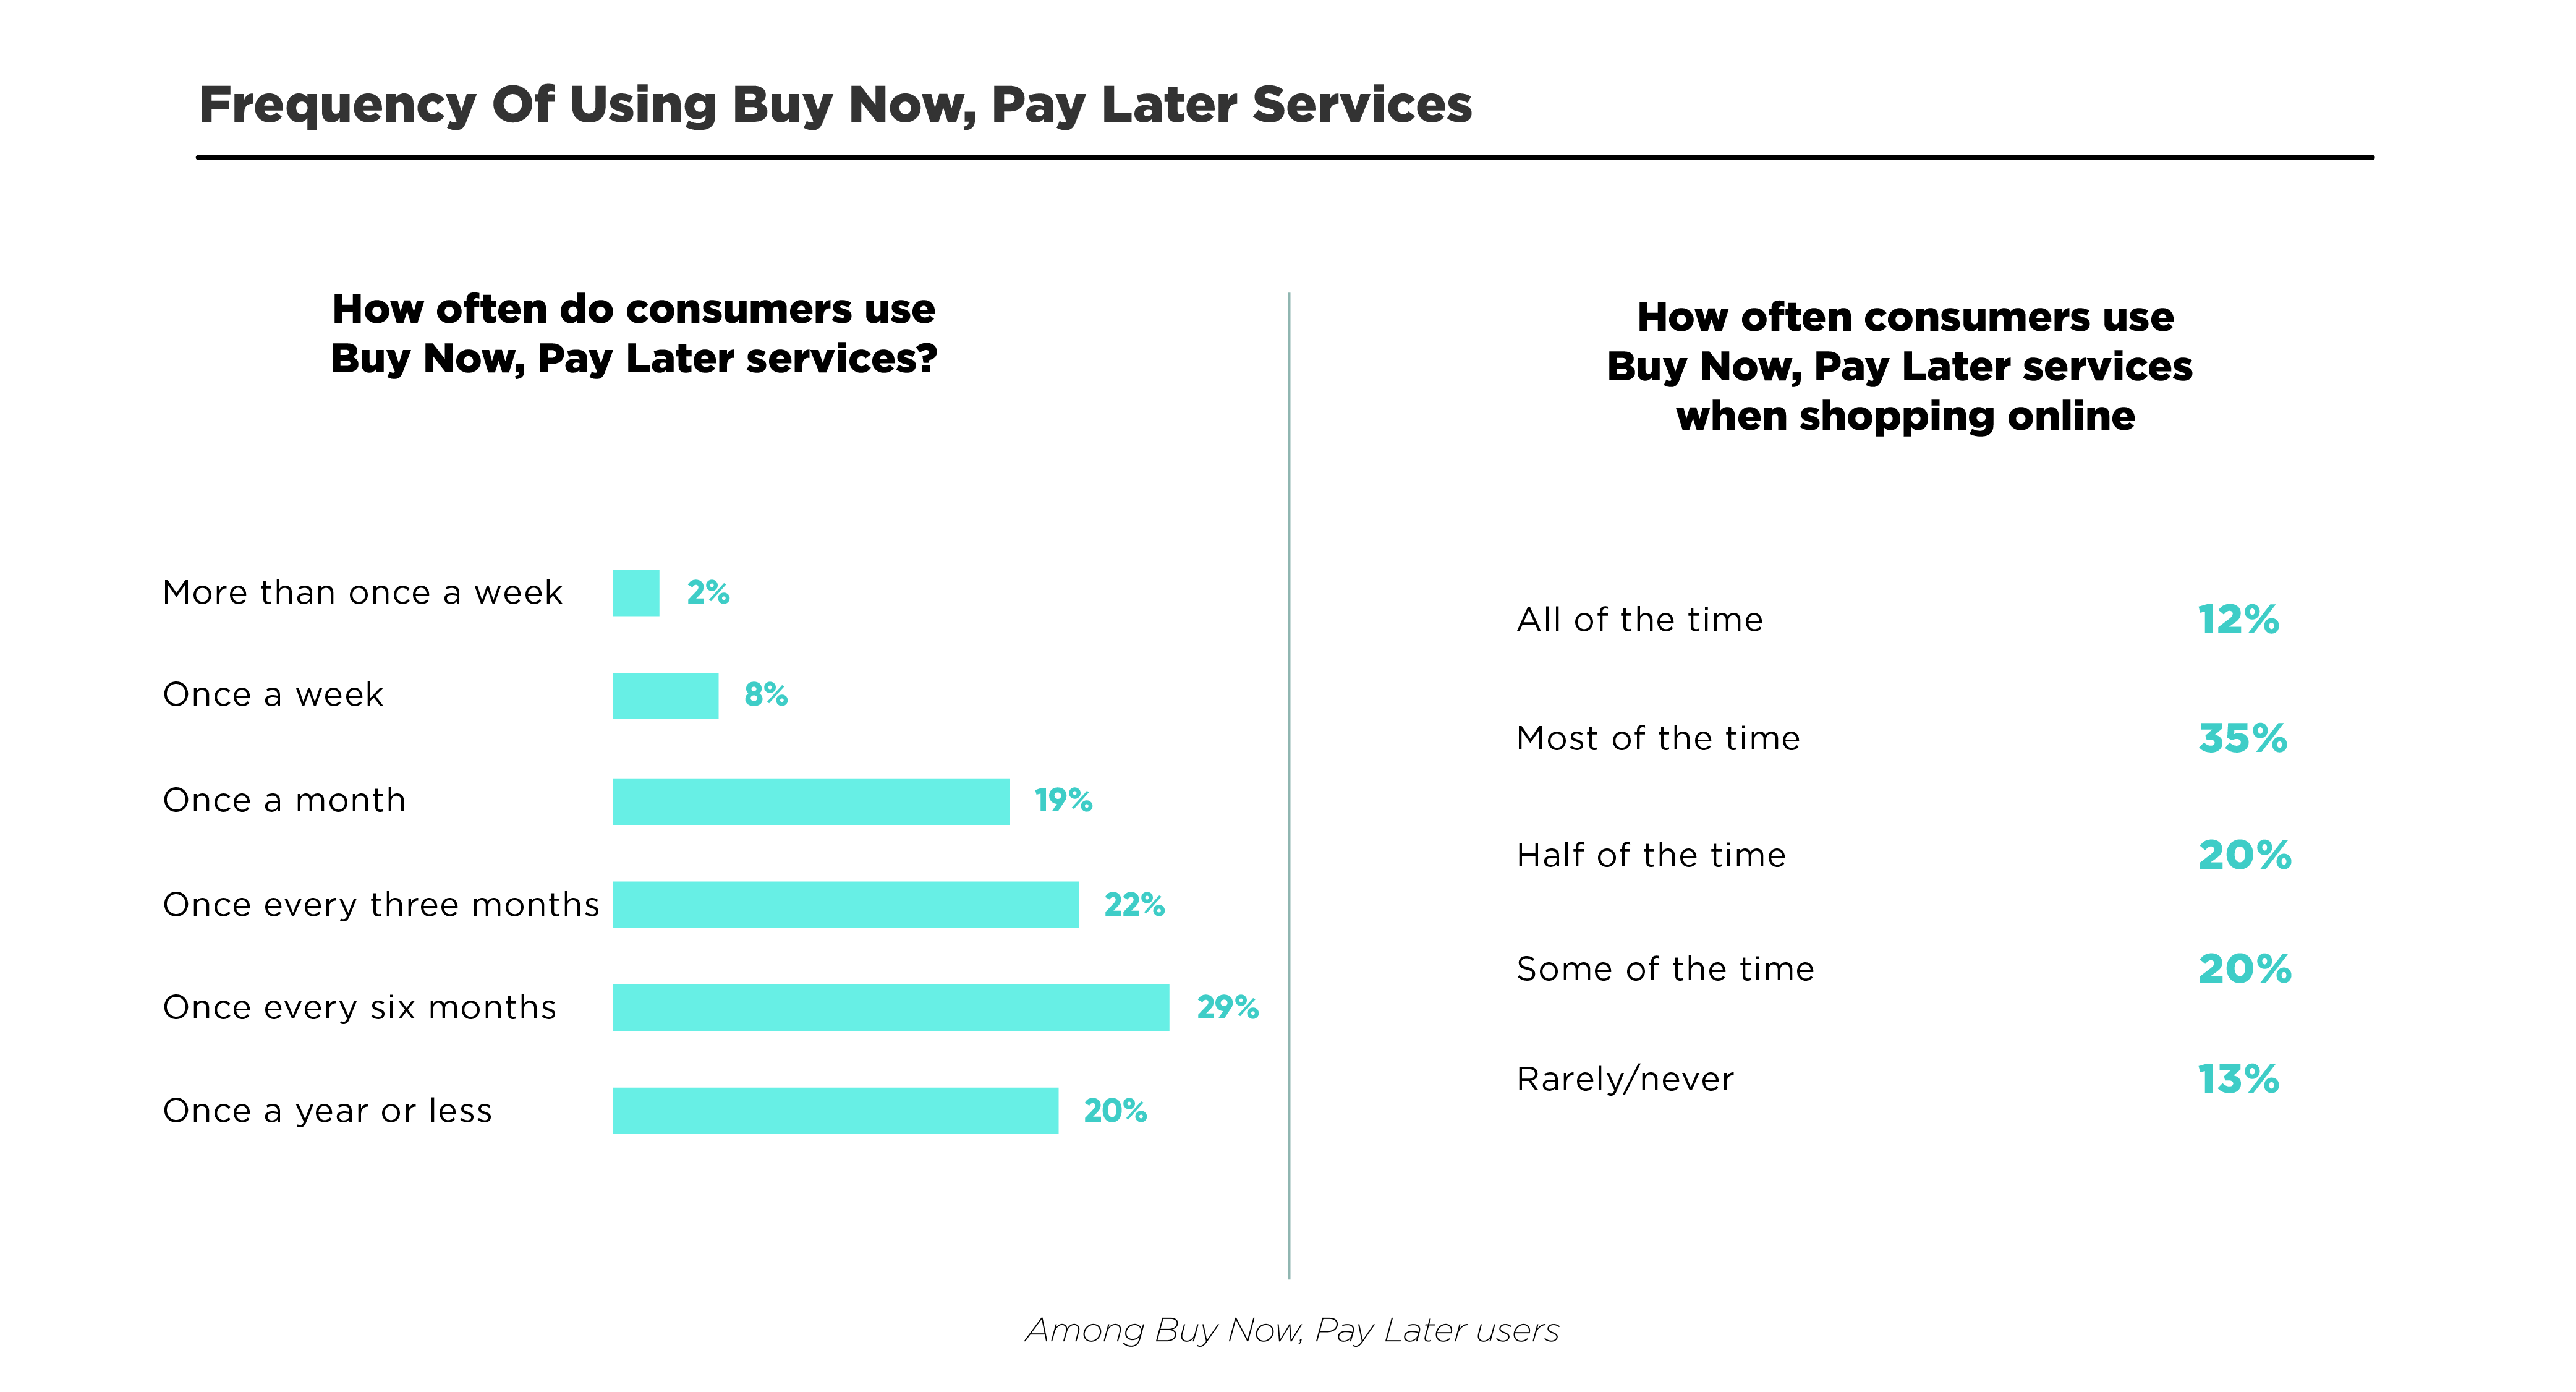 How Often Do Consumers Use Buy Now, Pay Later Services?